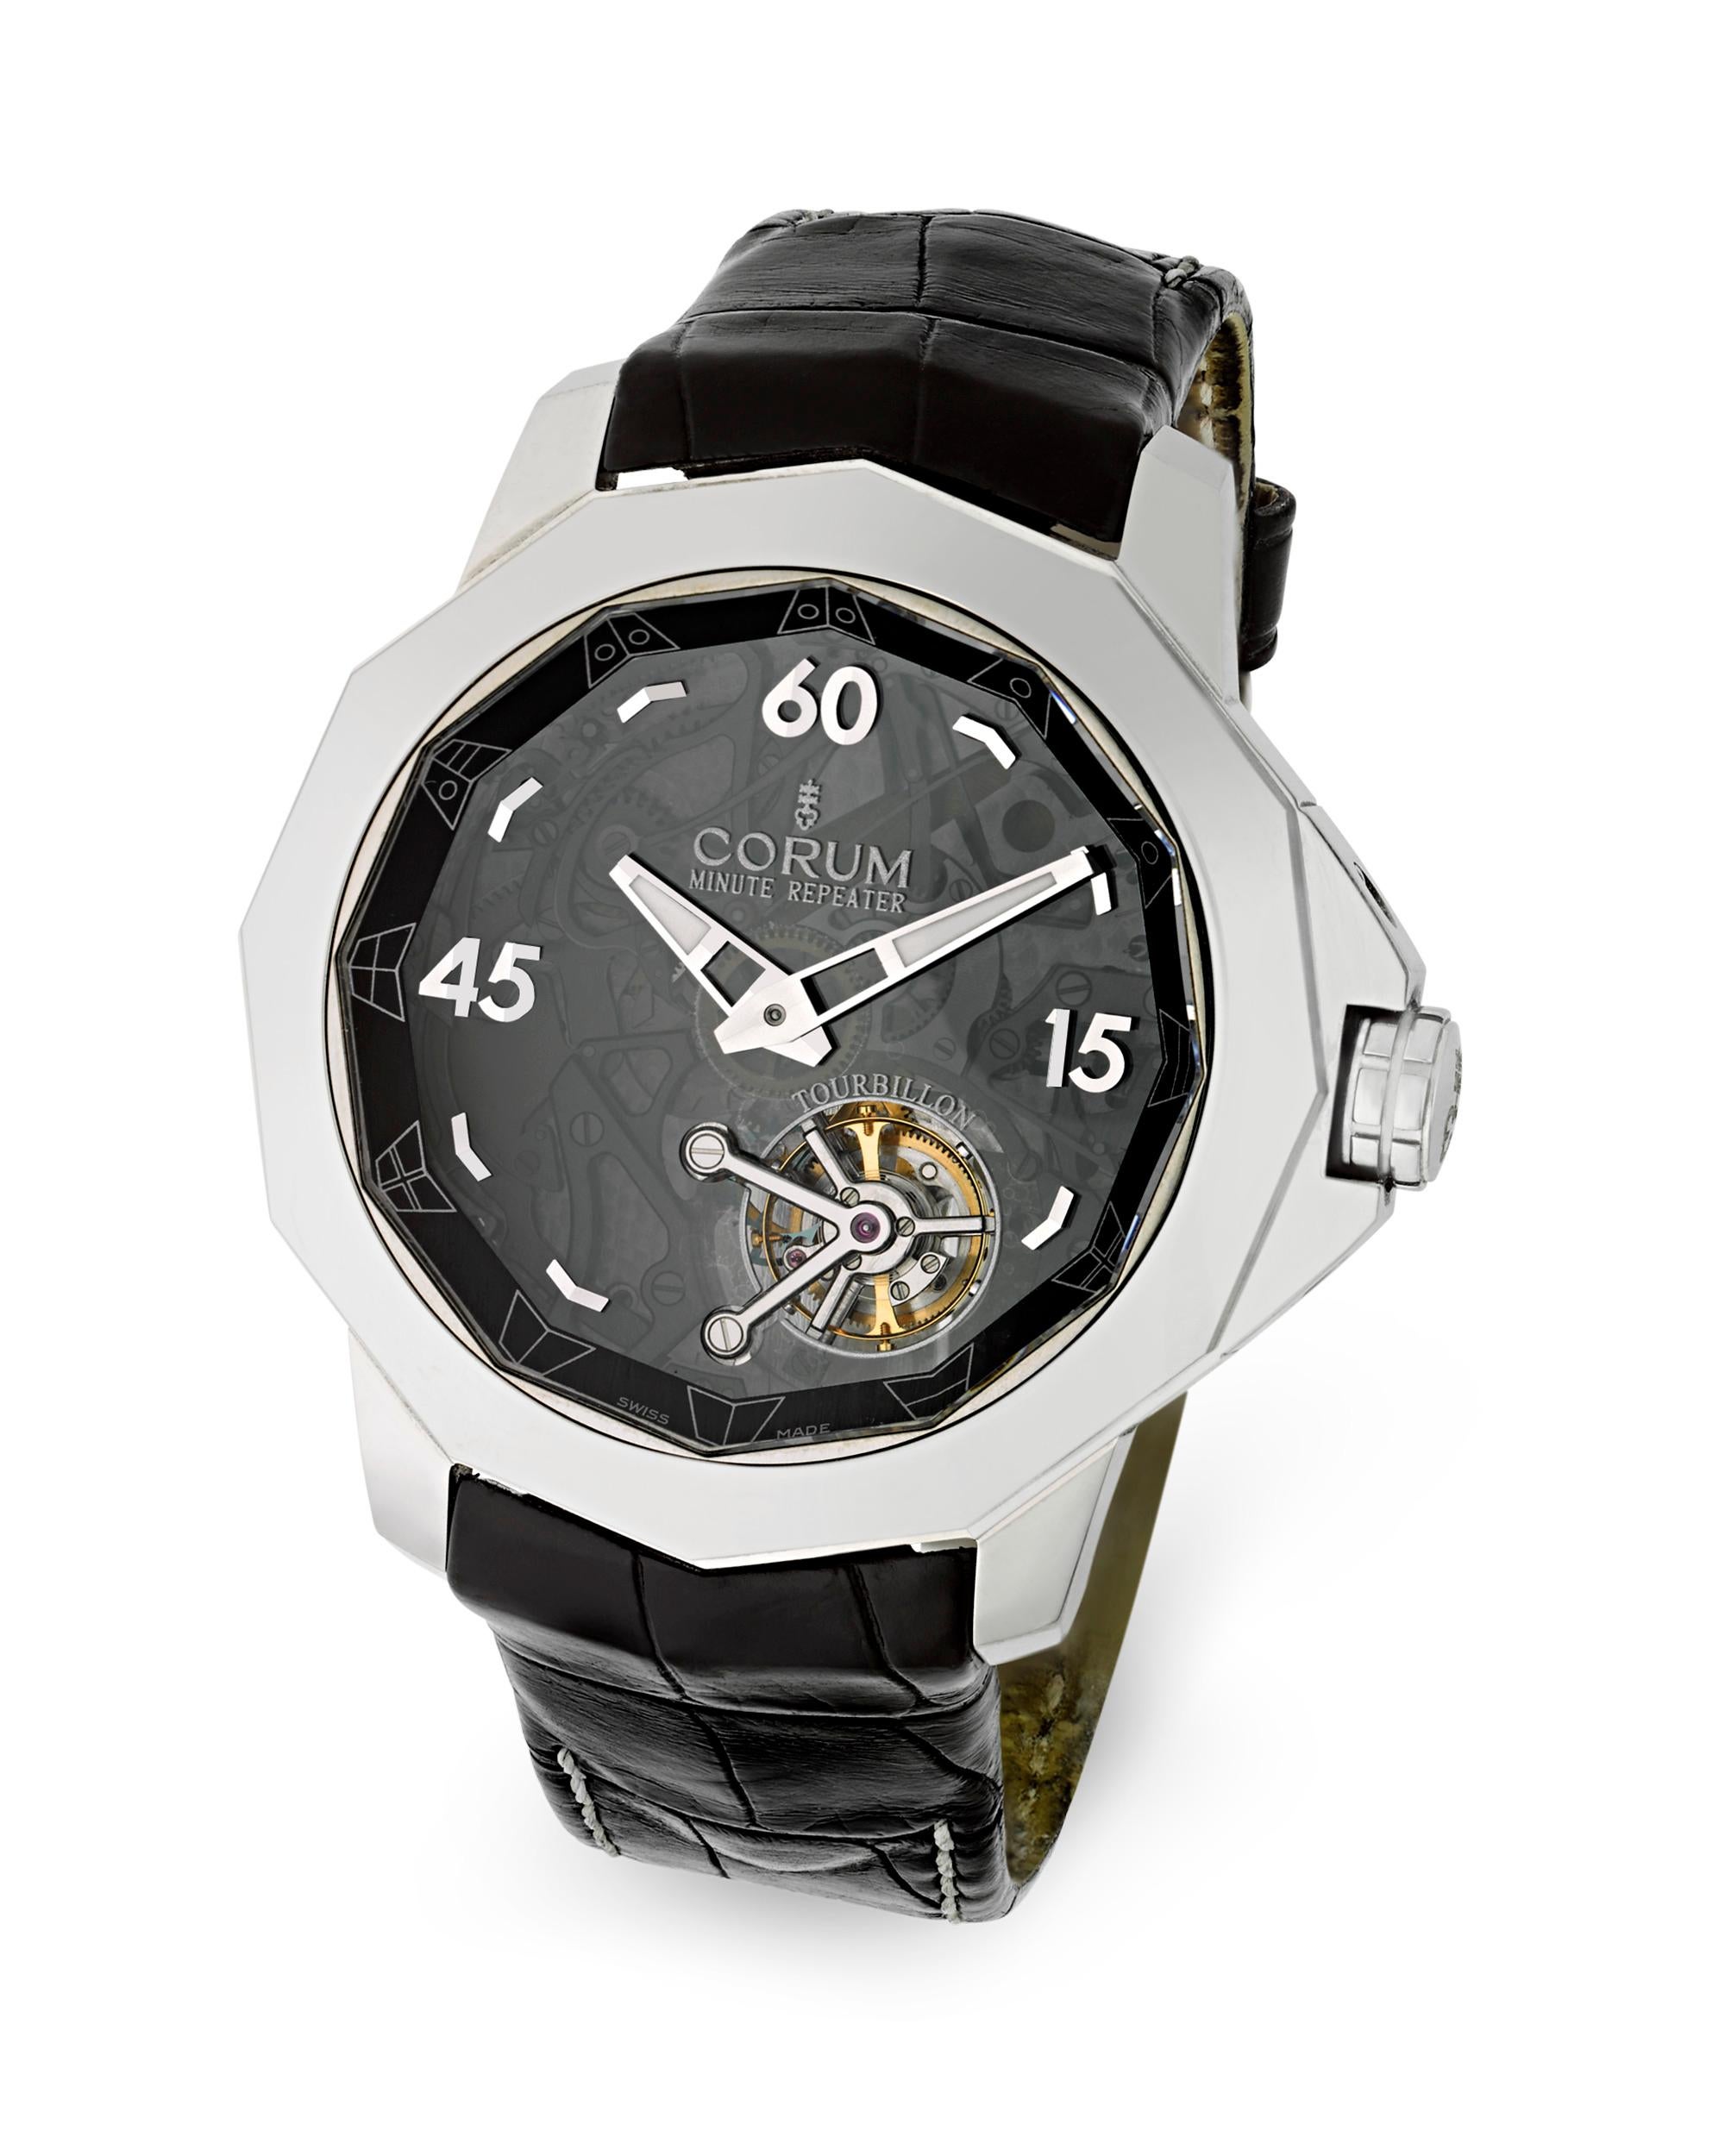 This outstanding watch by Corum, the renowned Swiss watch manufactory, hails from their exclusive Admiral collection. Released in 2010 to celebrate the 50th anniversary of this legendary collection, this Admiral’s Cup sports watch features two